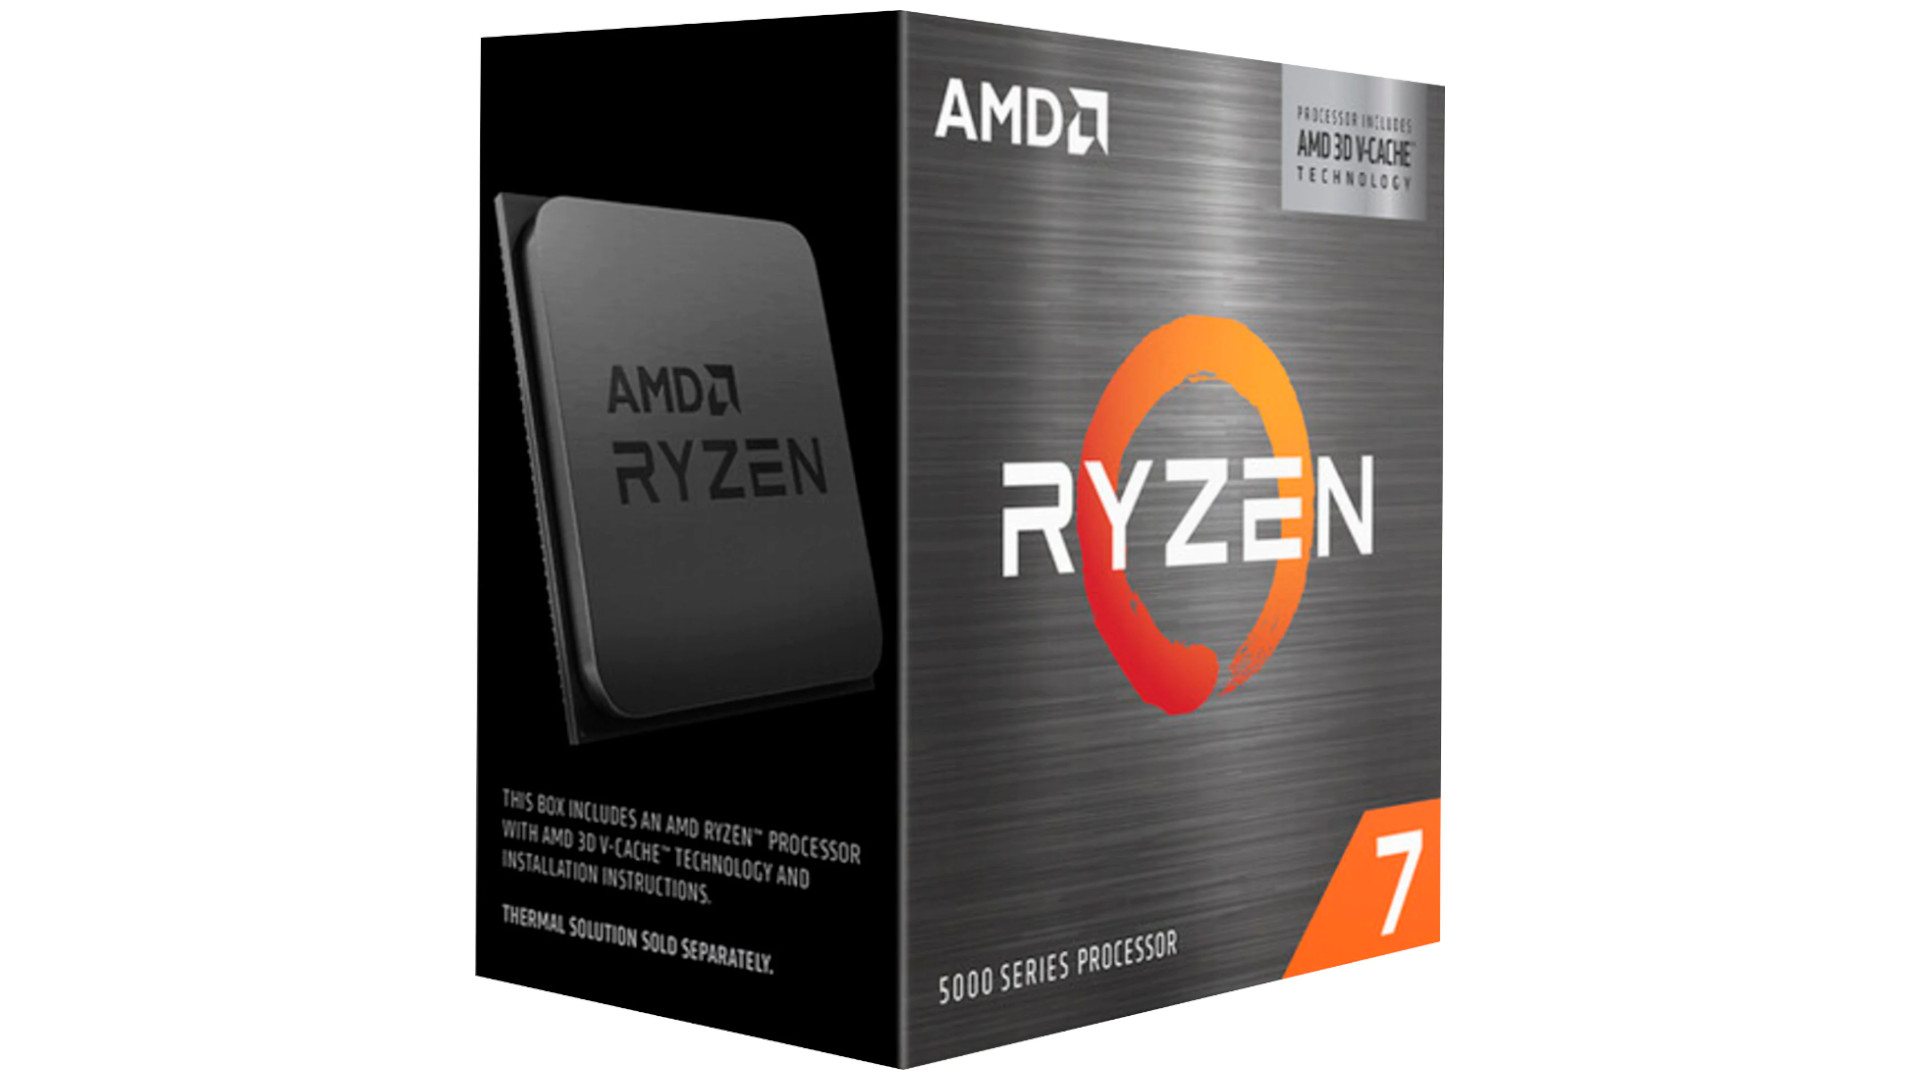 The best AMD gaming CPU is the AMD Ryzen 7 5800X3D